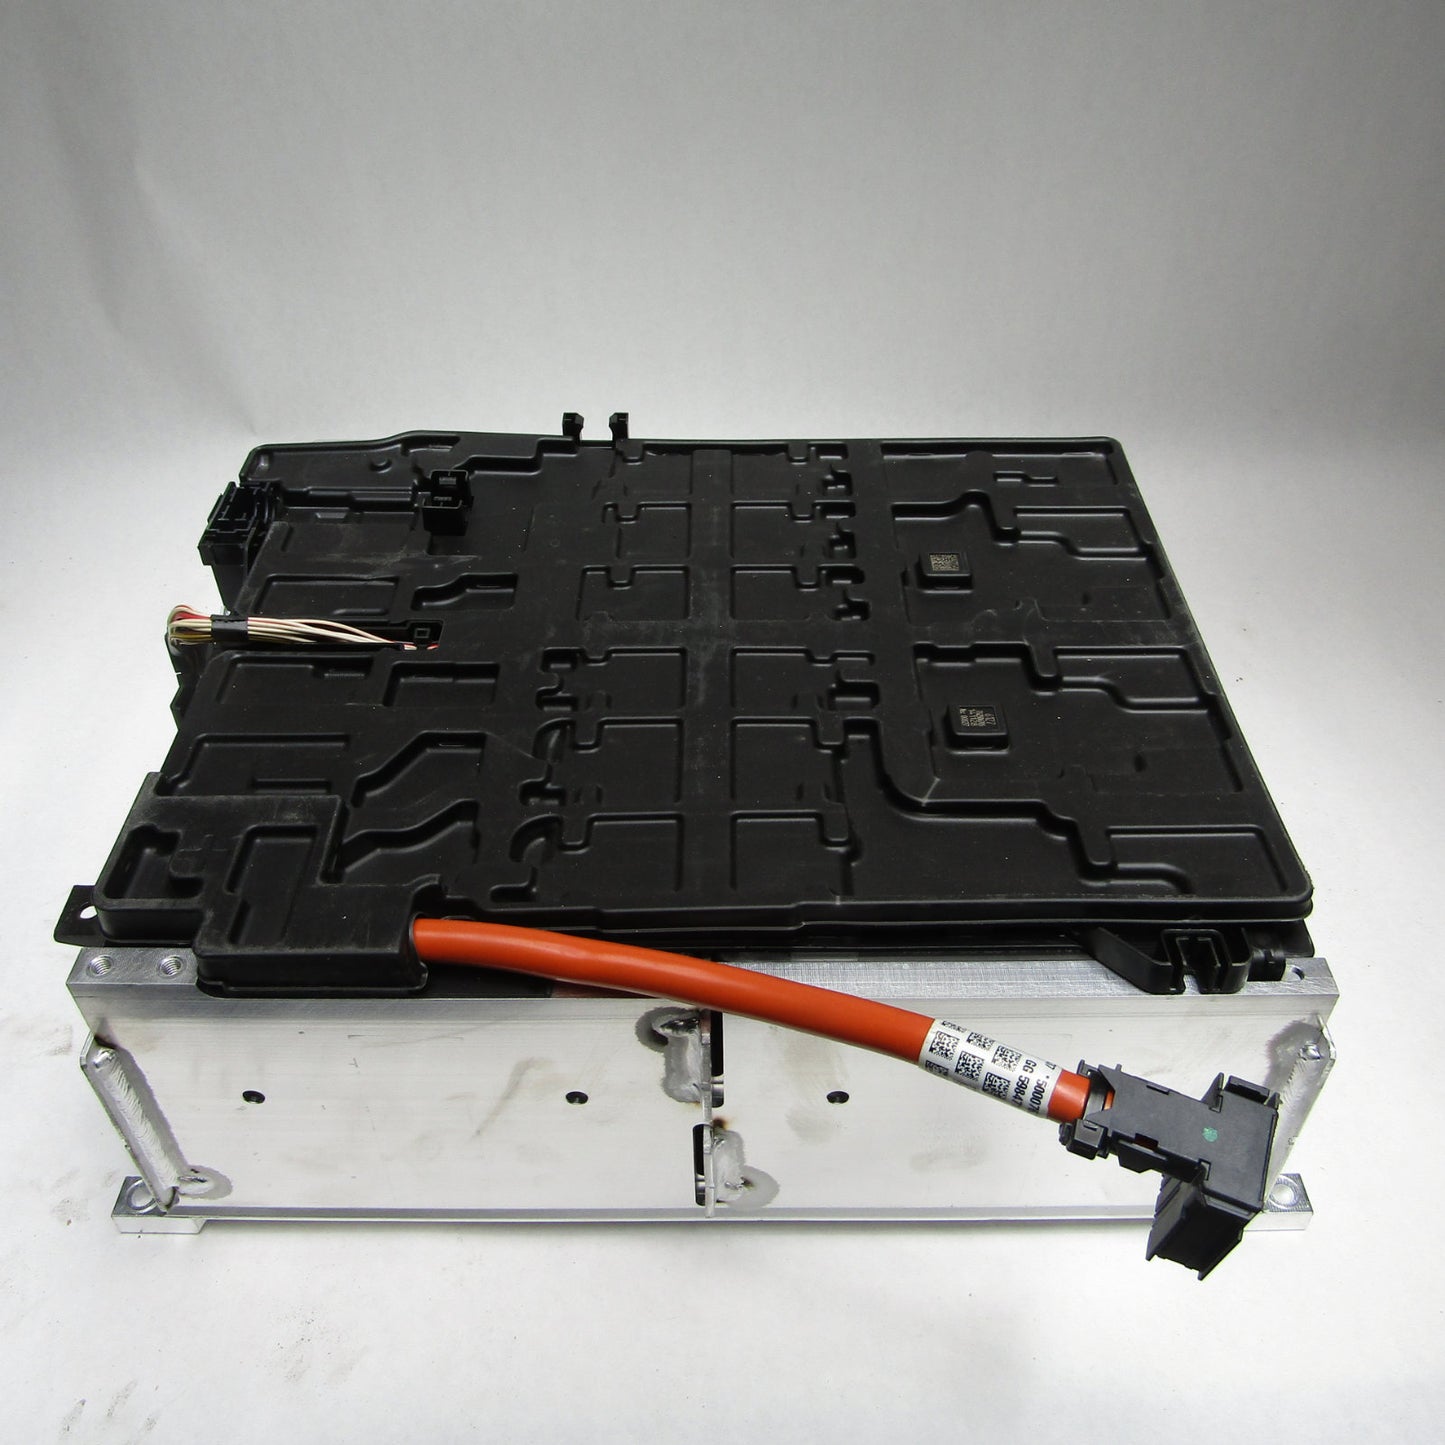 BMW i3 / 2.7 kWh / Battery Modules (order of 10)